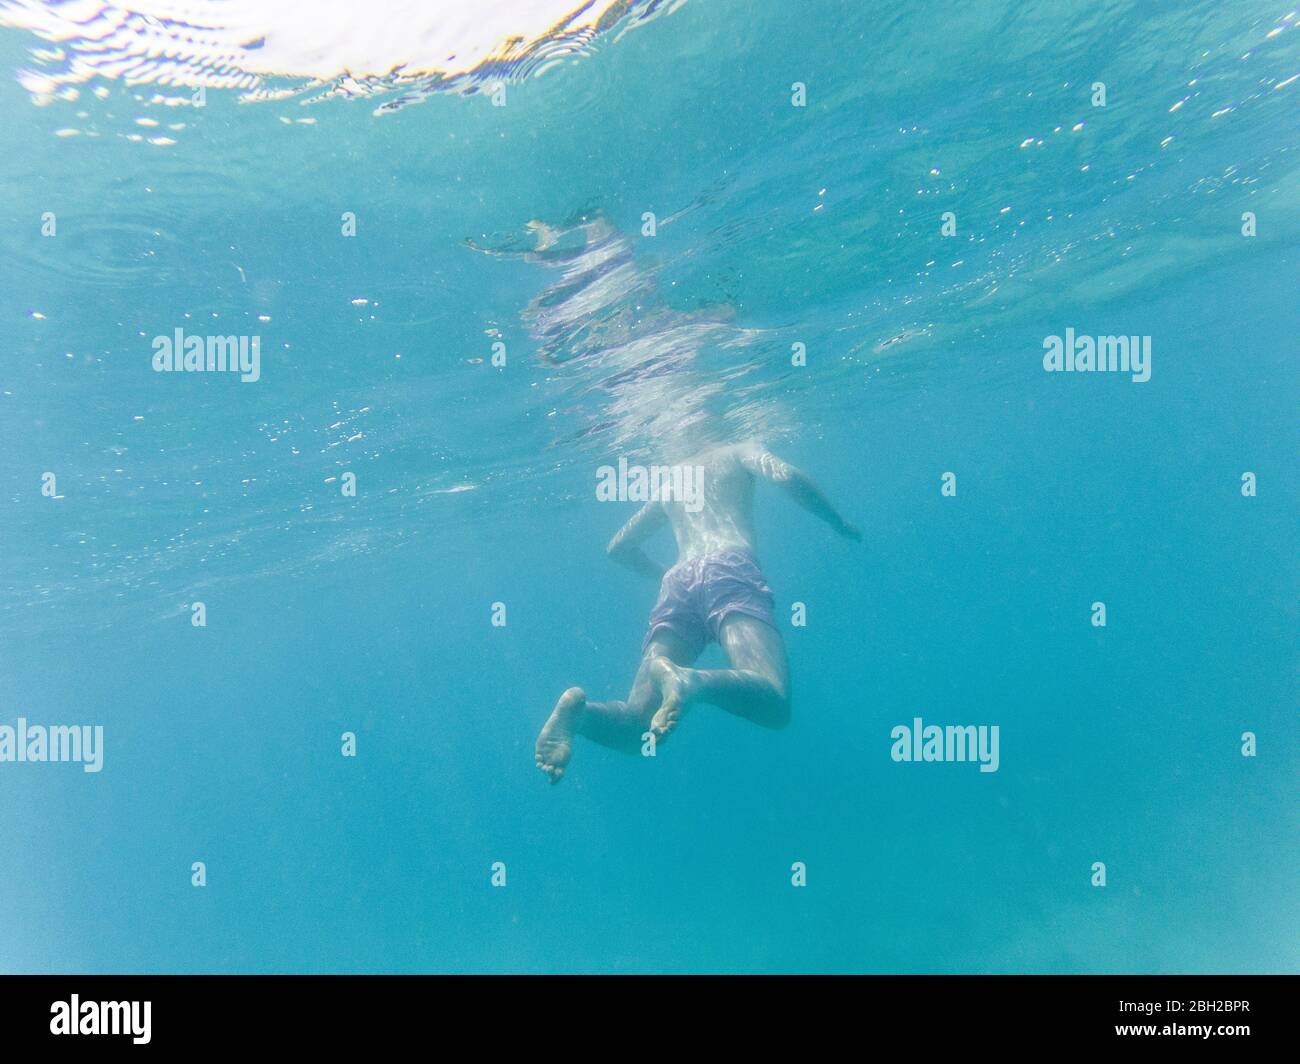 Man floating in water, underwater view Stock Photo - Alamy